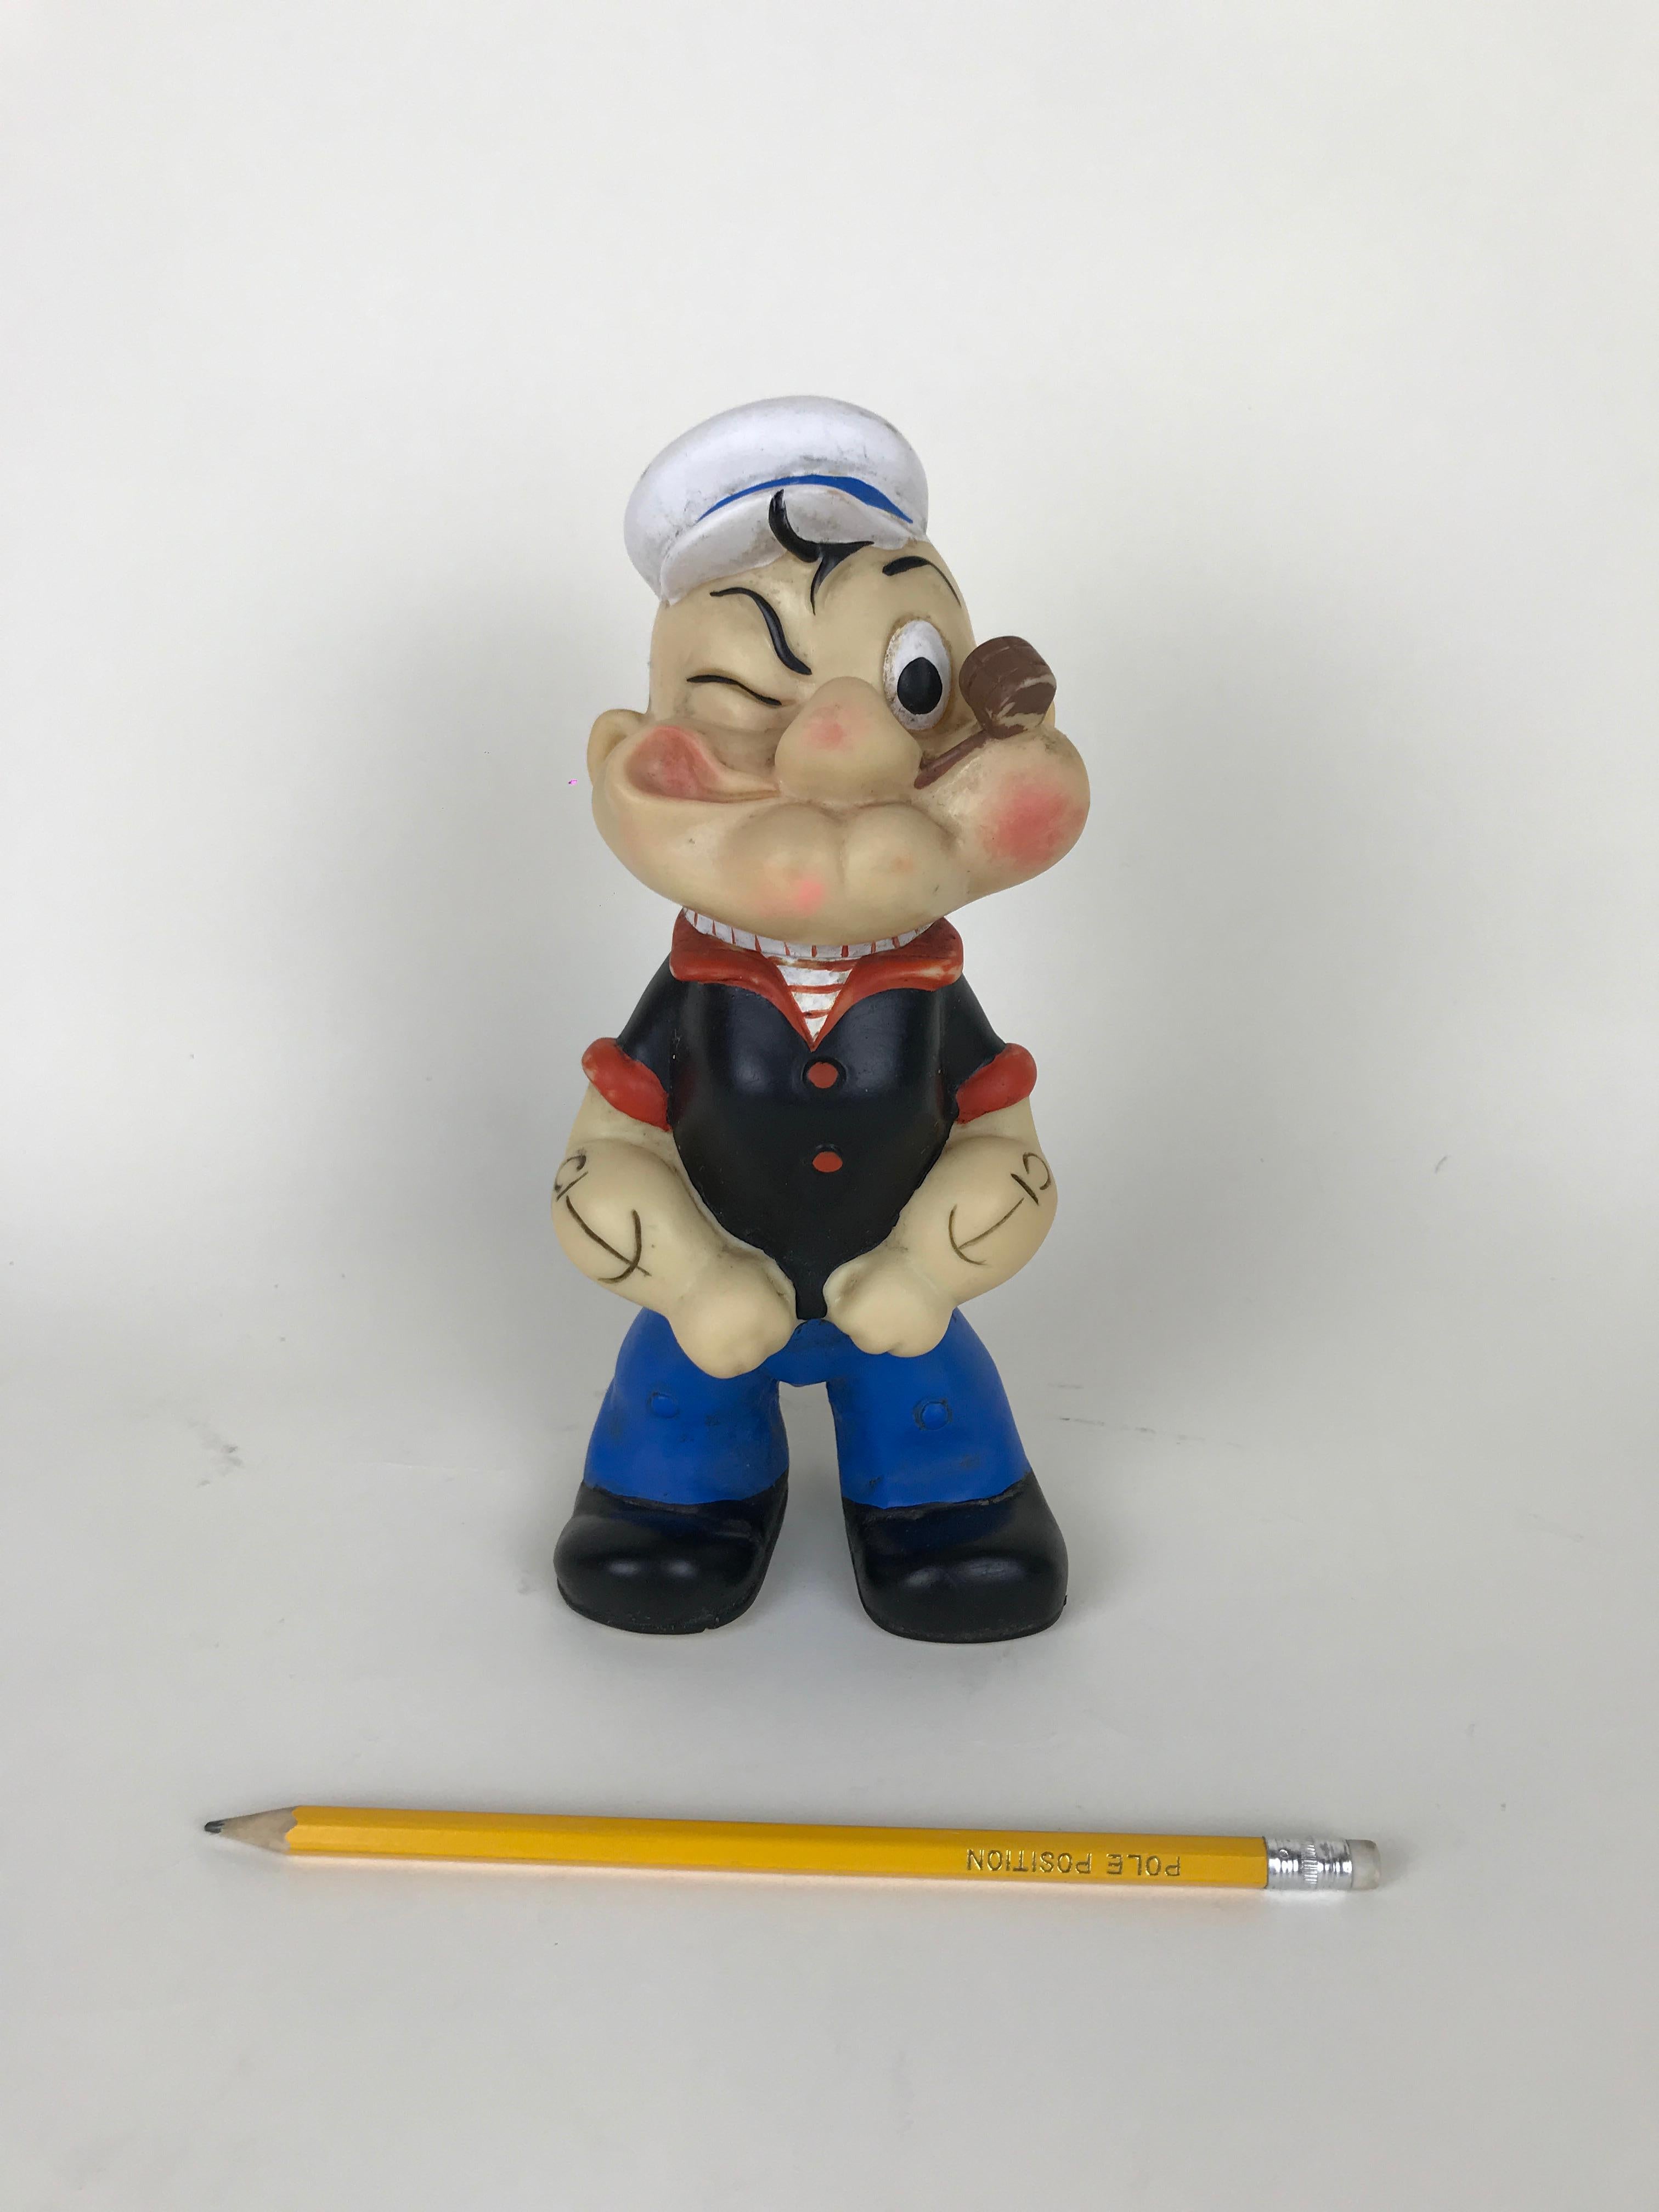 2019 marks the 90th birthday of the famed comic character Popeye the Sailor.

This very rare vintage Popeye the Sailor rubber squeak toy was made in Italian by Italo Cremona toy maker in the 1960s.

The whistle at he bottom of one foot is